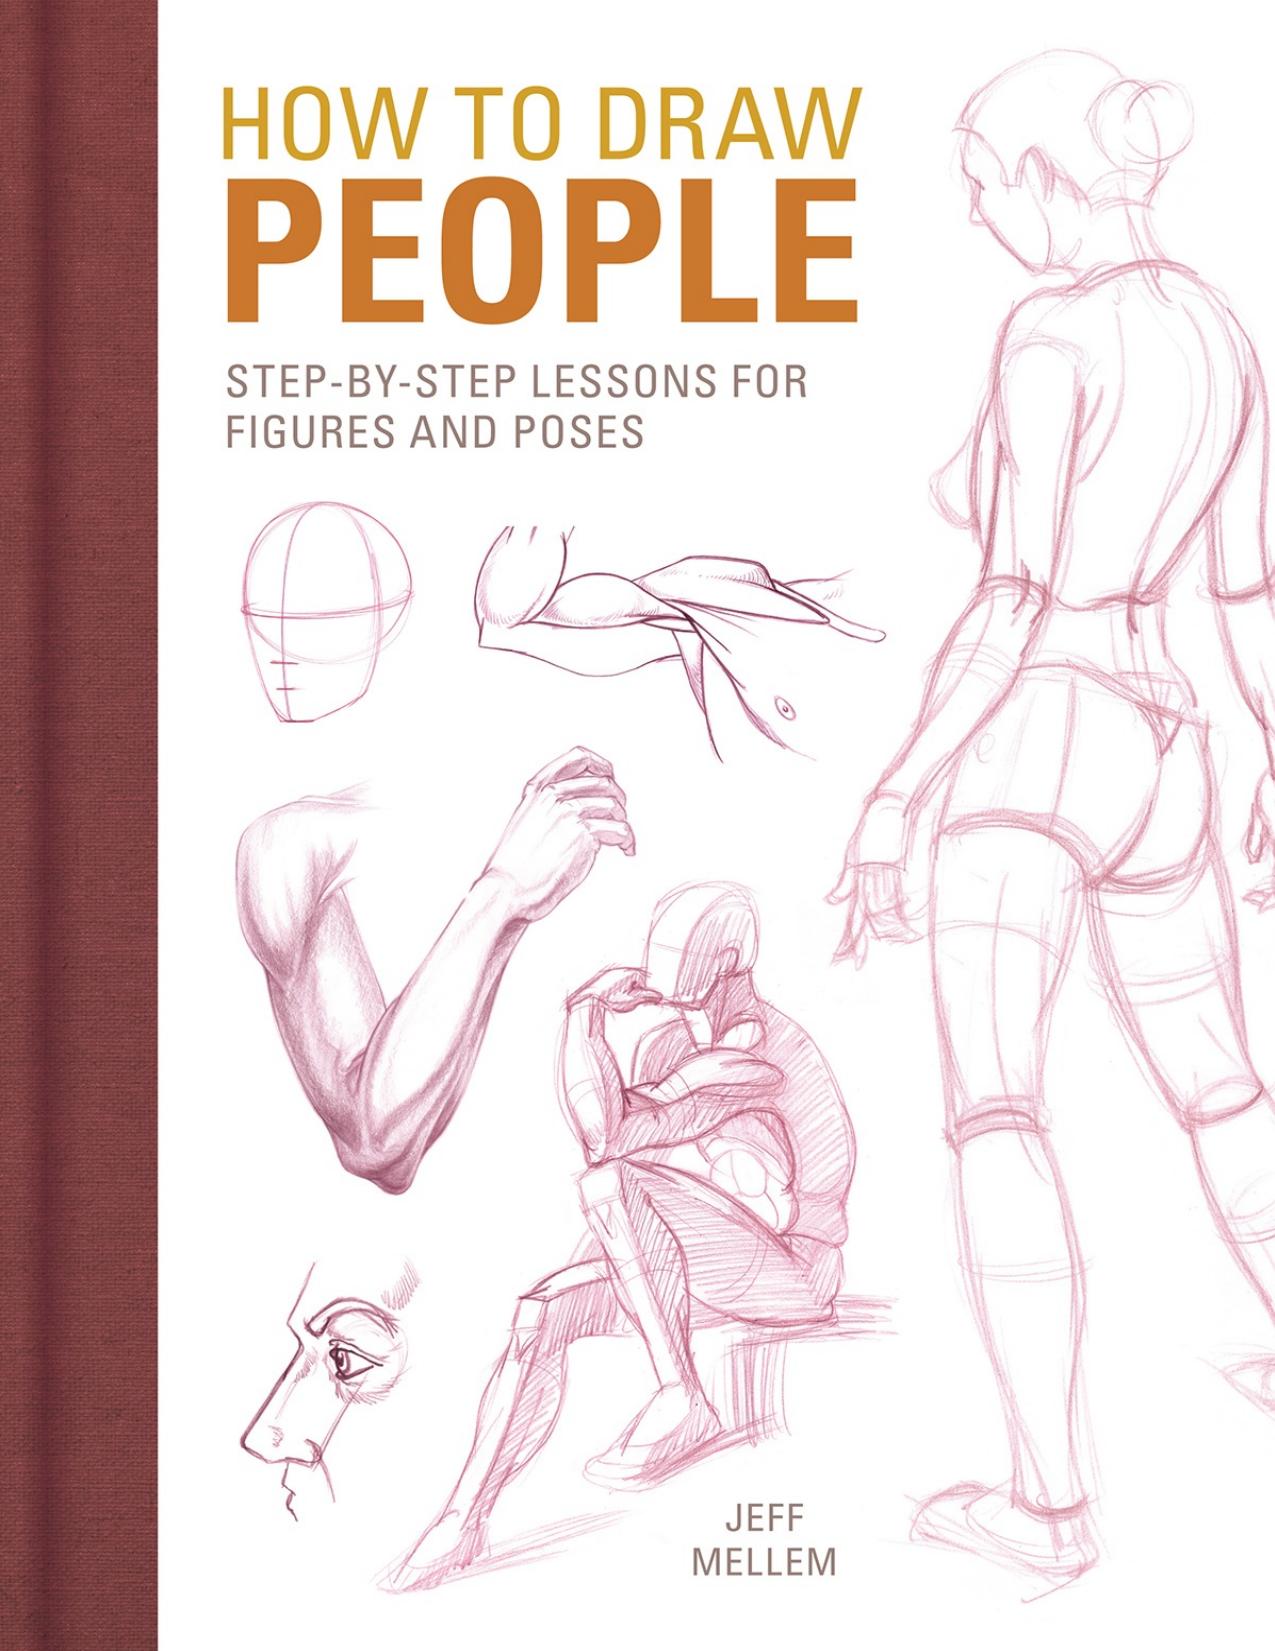 How to Draw People: Step-by-Step Lessons for Figures and Poses - PDFDrive.com